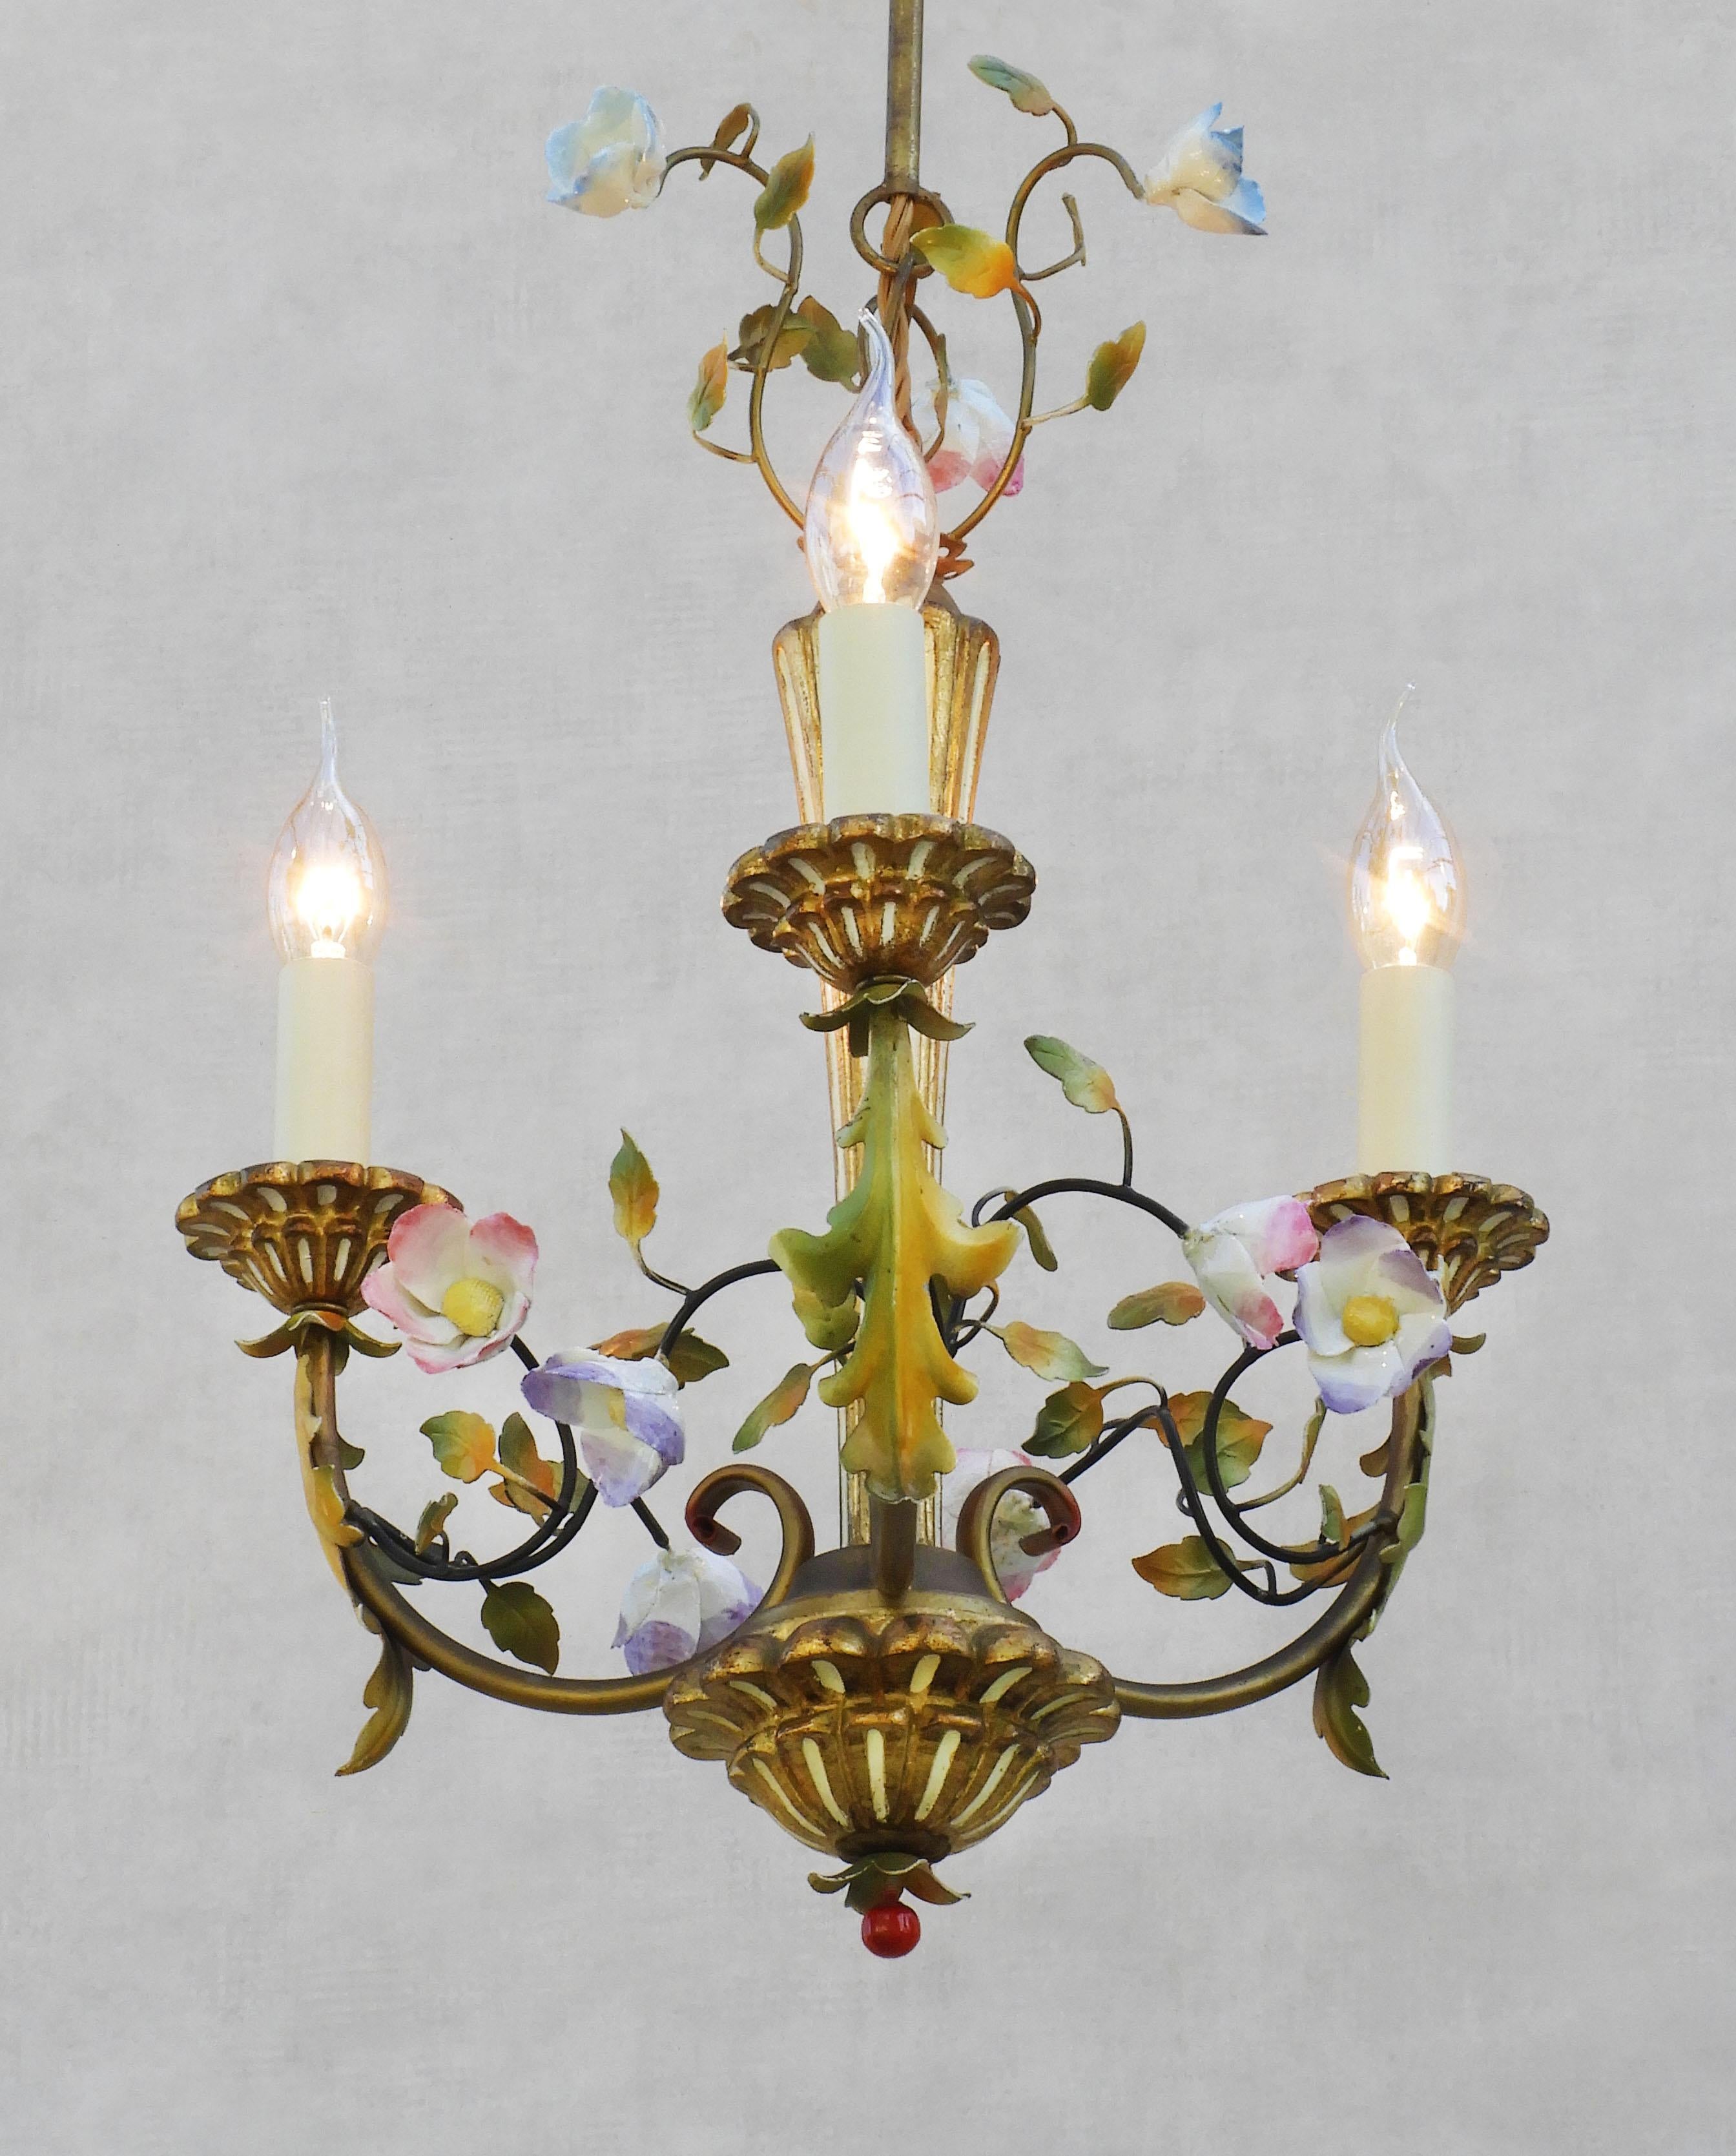 Romantic French Midcentury Giltwood and Toleware Chandelier with Porcelaine Flowers C1950 For Sale